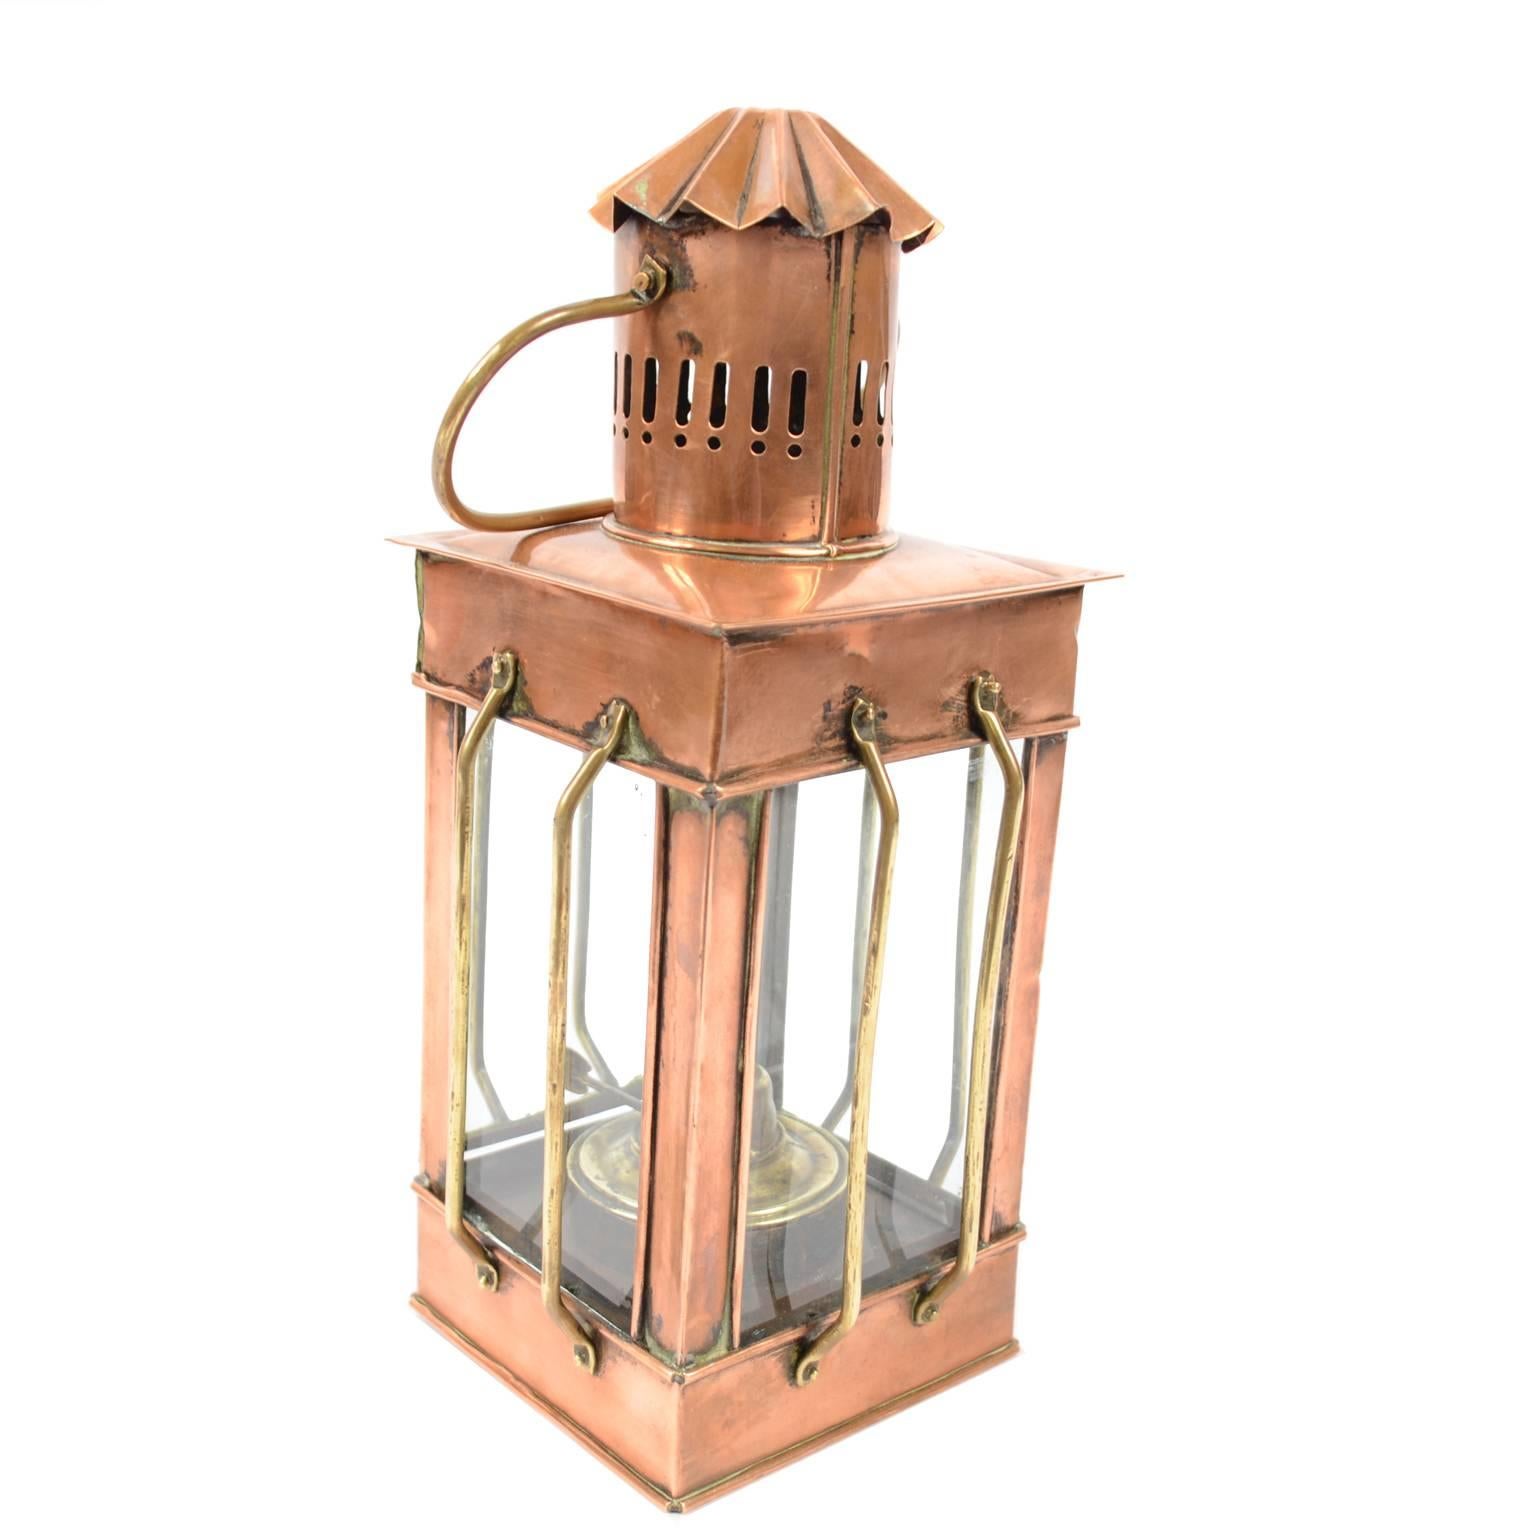 Antique lamp, glass and copper, for light signals, English manufacture, early 1900. Very good condition. Measures: Cm 28.5(h) x 10.5 x 10.5.
Shipping in insured by Lloyd's London and the gift box is free (look at the last picture).